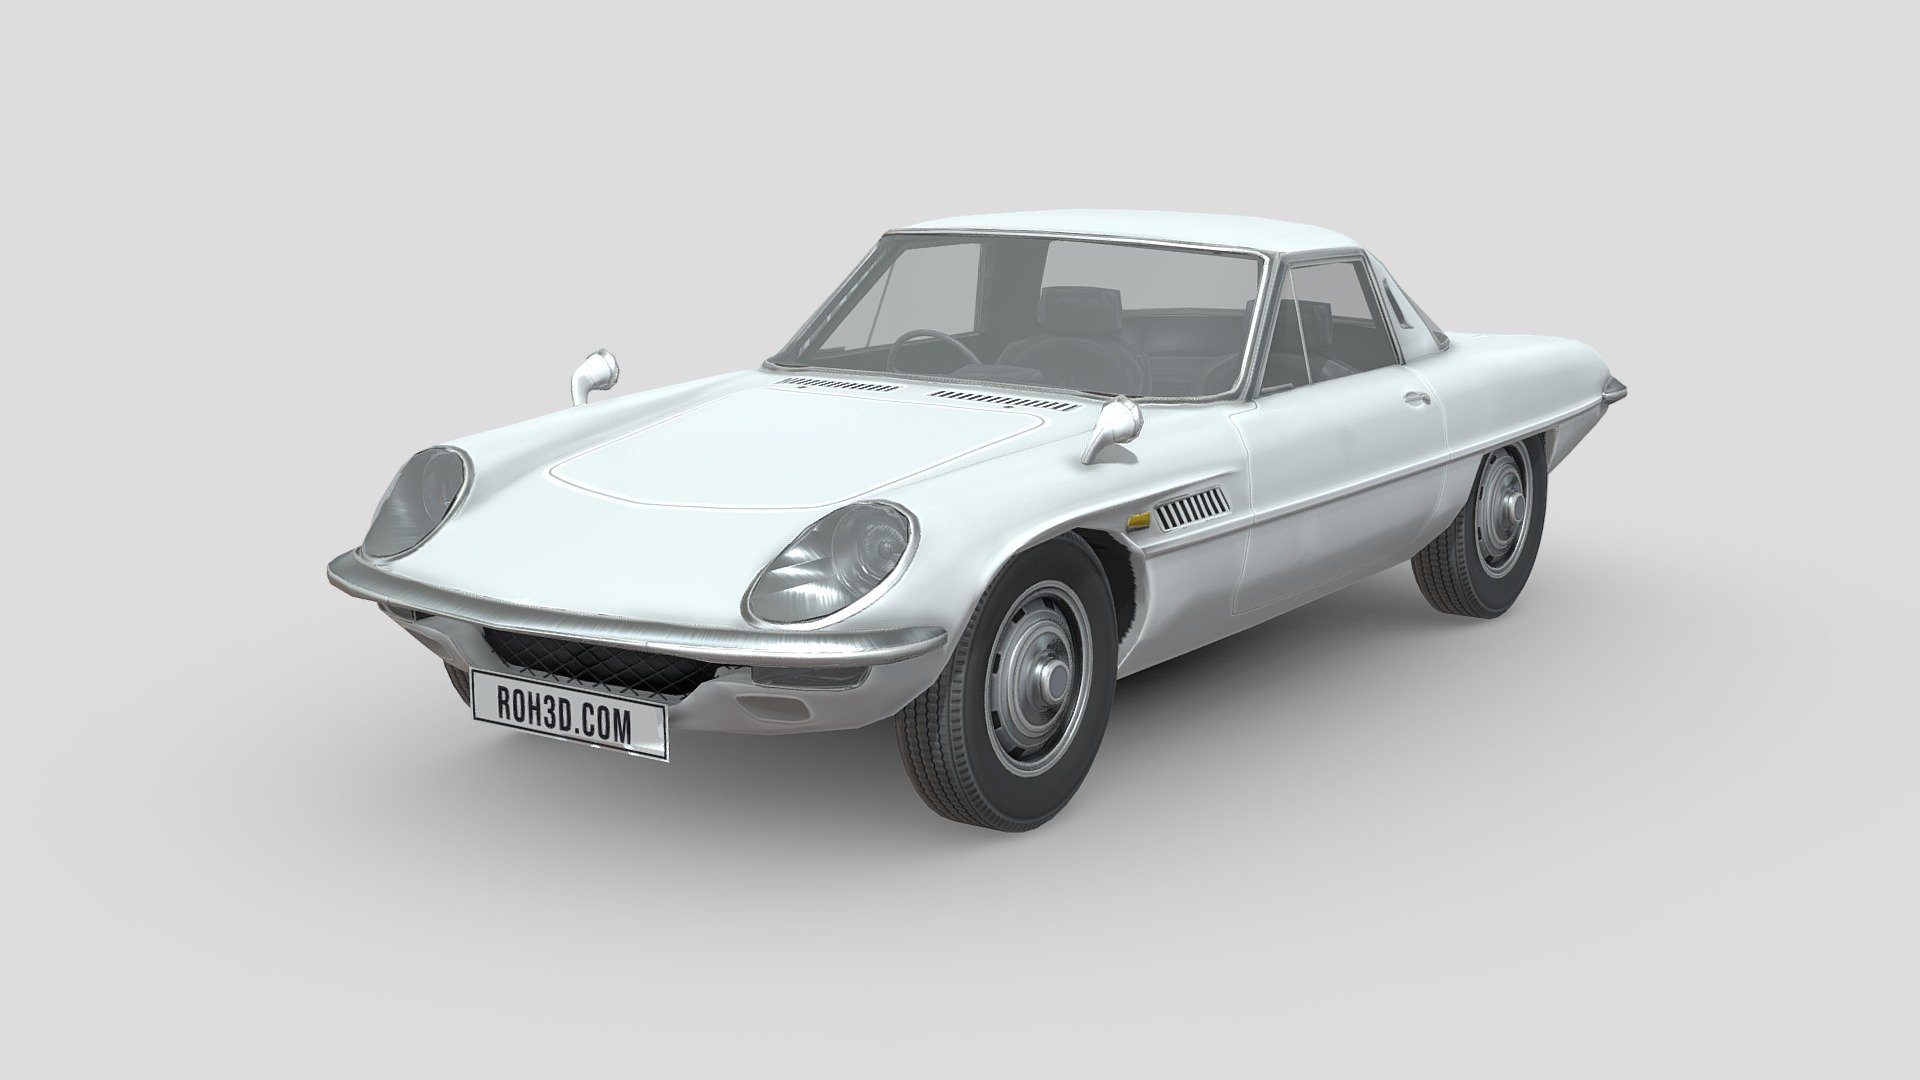 The Mazda Cosmo (マツダ・コスモ, Matsuda Kosumo) is an automobile which was produced by Mazda from 1967 to 1995. Throughout its history, the Cosmo served as a &ldquo;halo